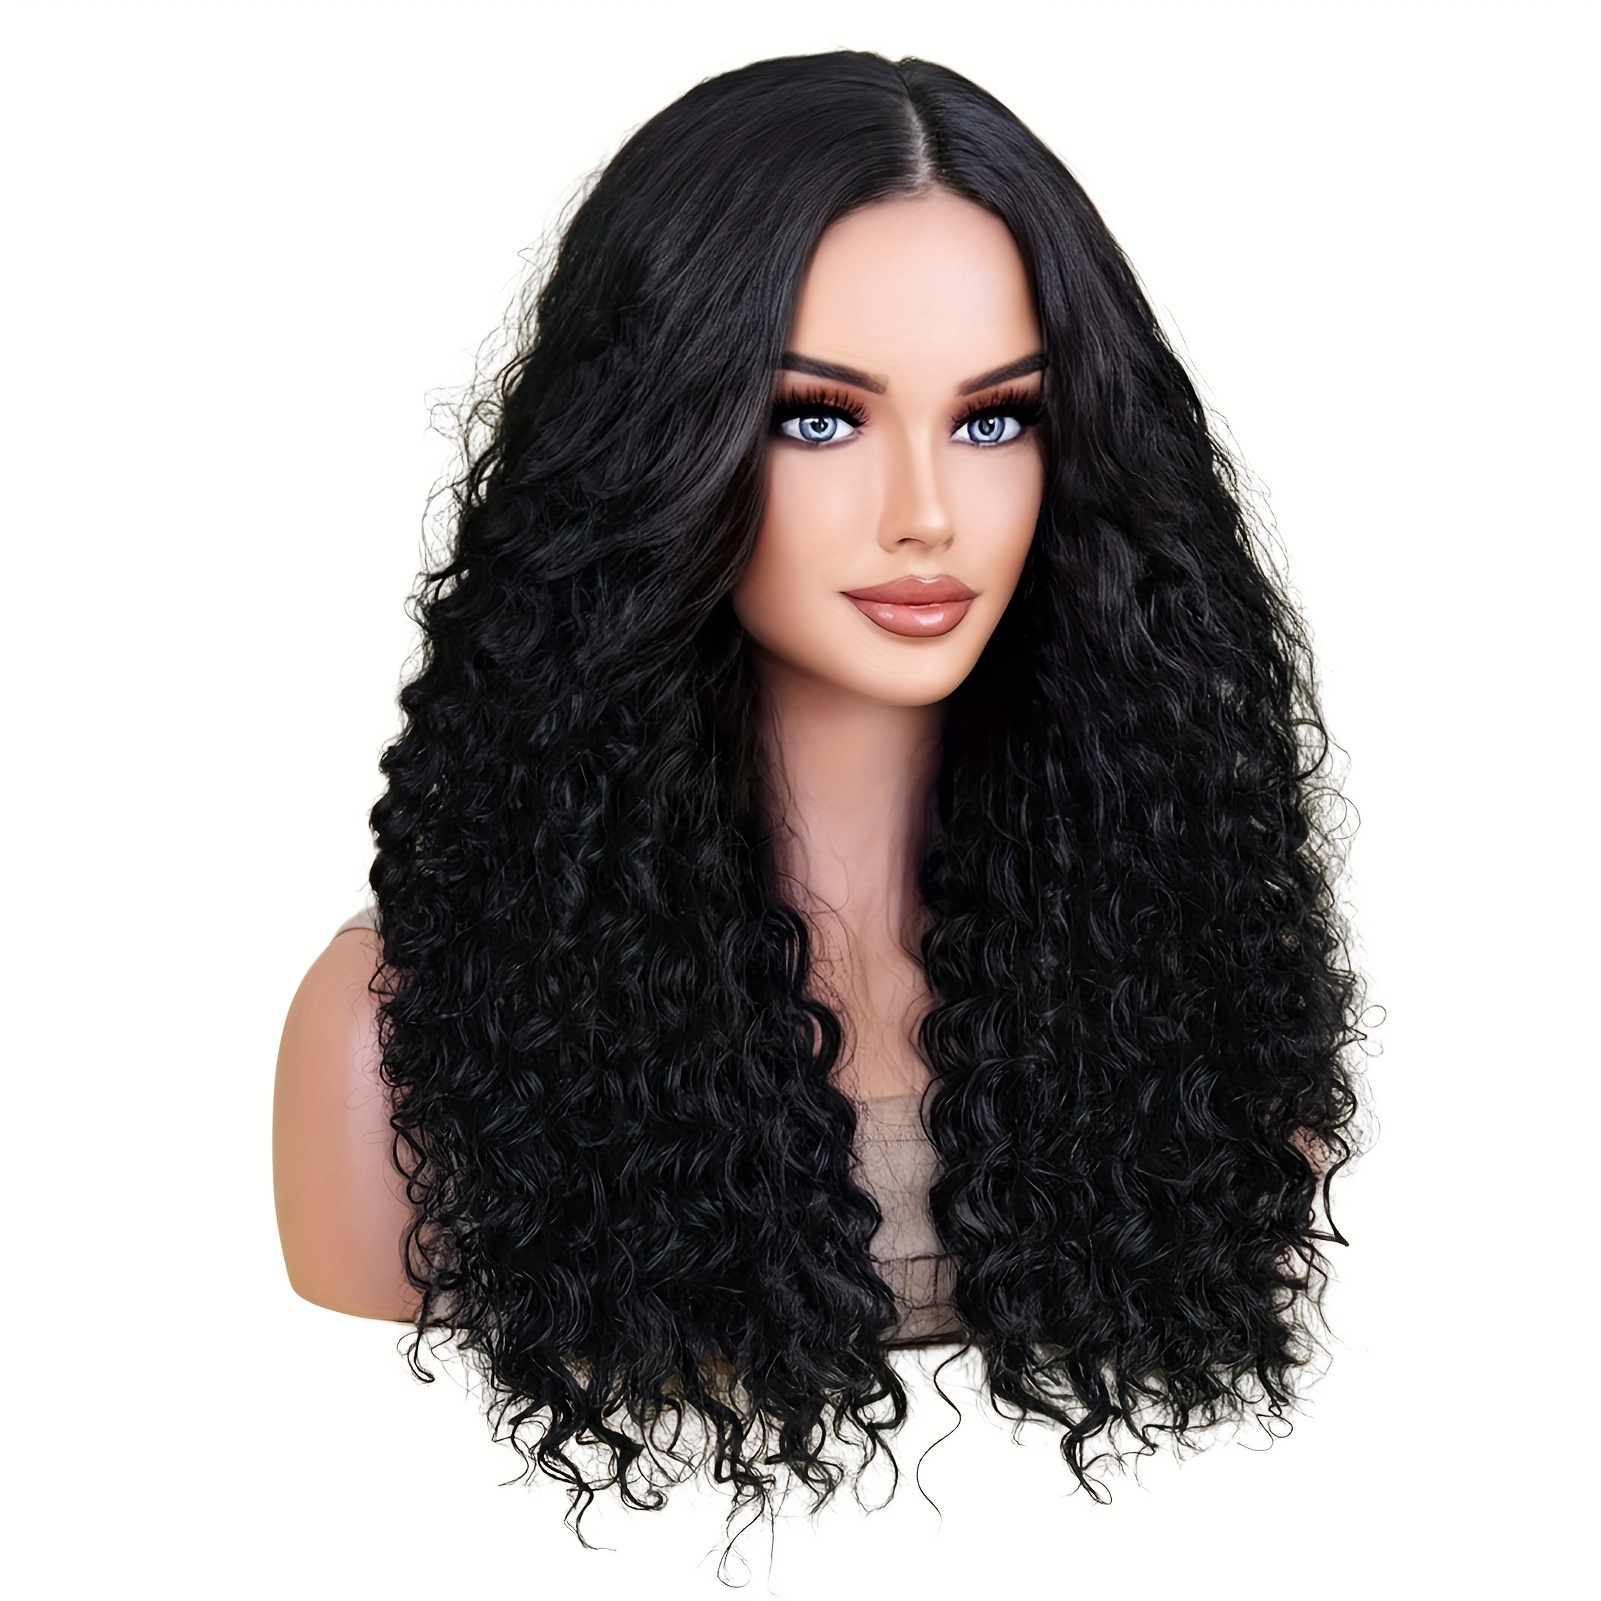 

26inch Women's Black Long Curly Wig, Long Fluffy Curly Hair Wig Deep Wave Lace Wigs Soft Breathable Synthetic Curly Wig For Parties Weddings Dating